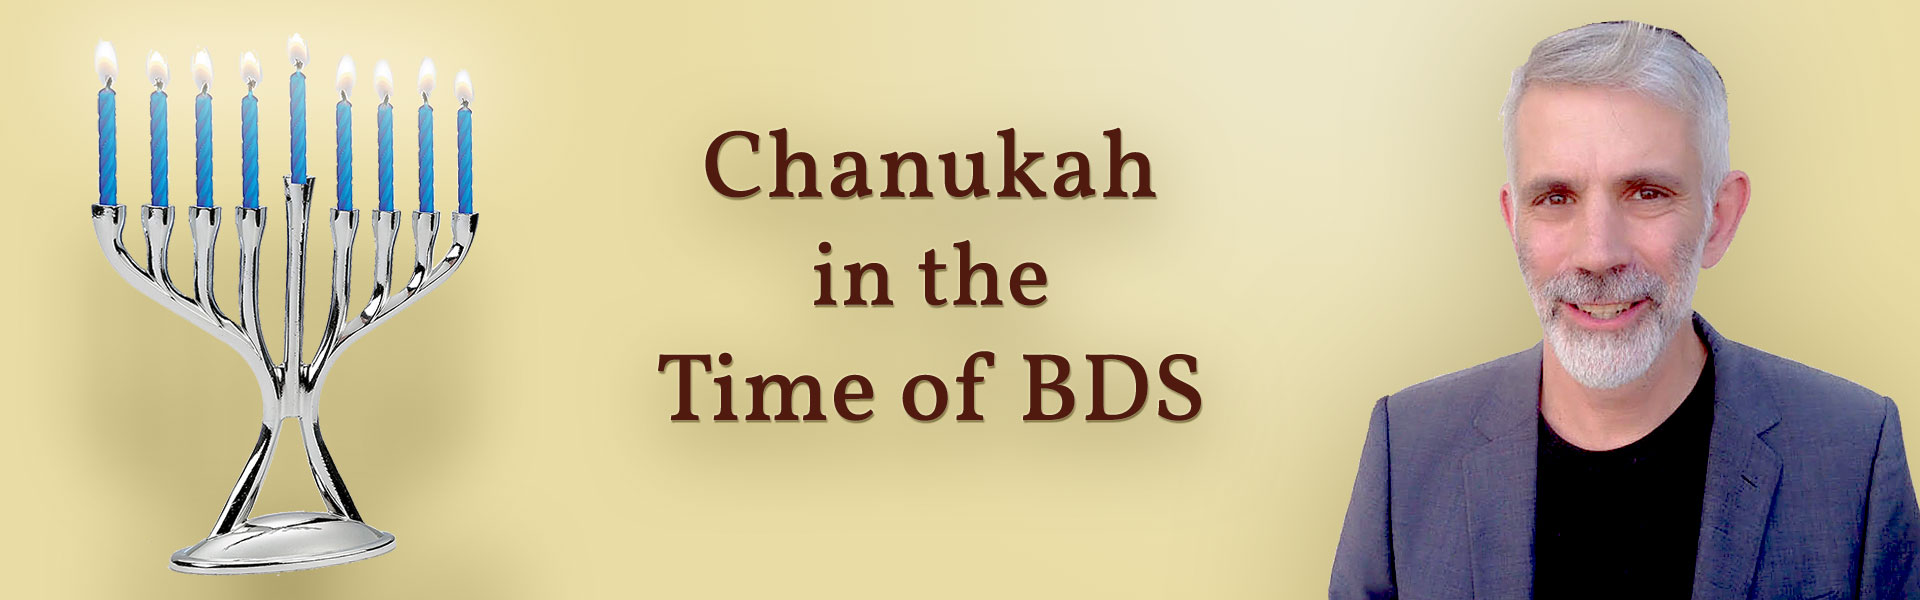 Chanukah in the Time of BDS